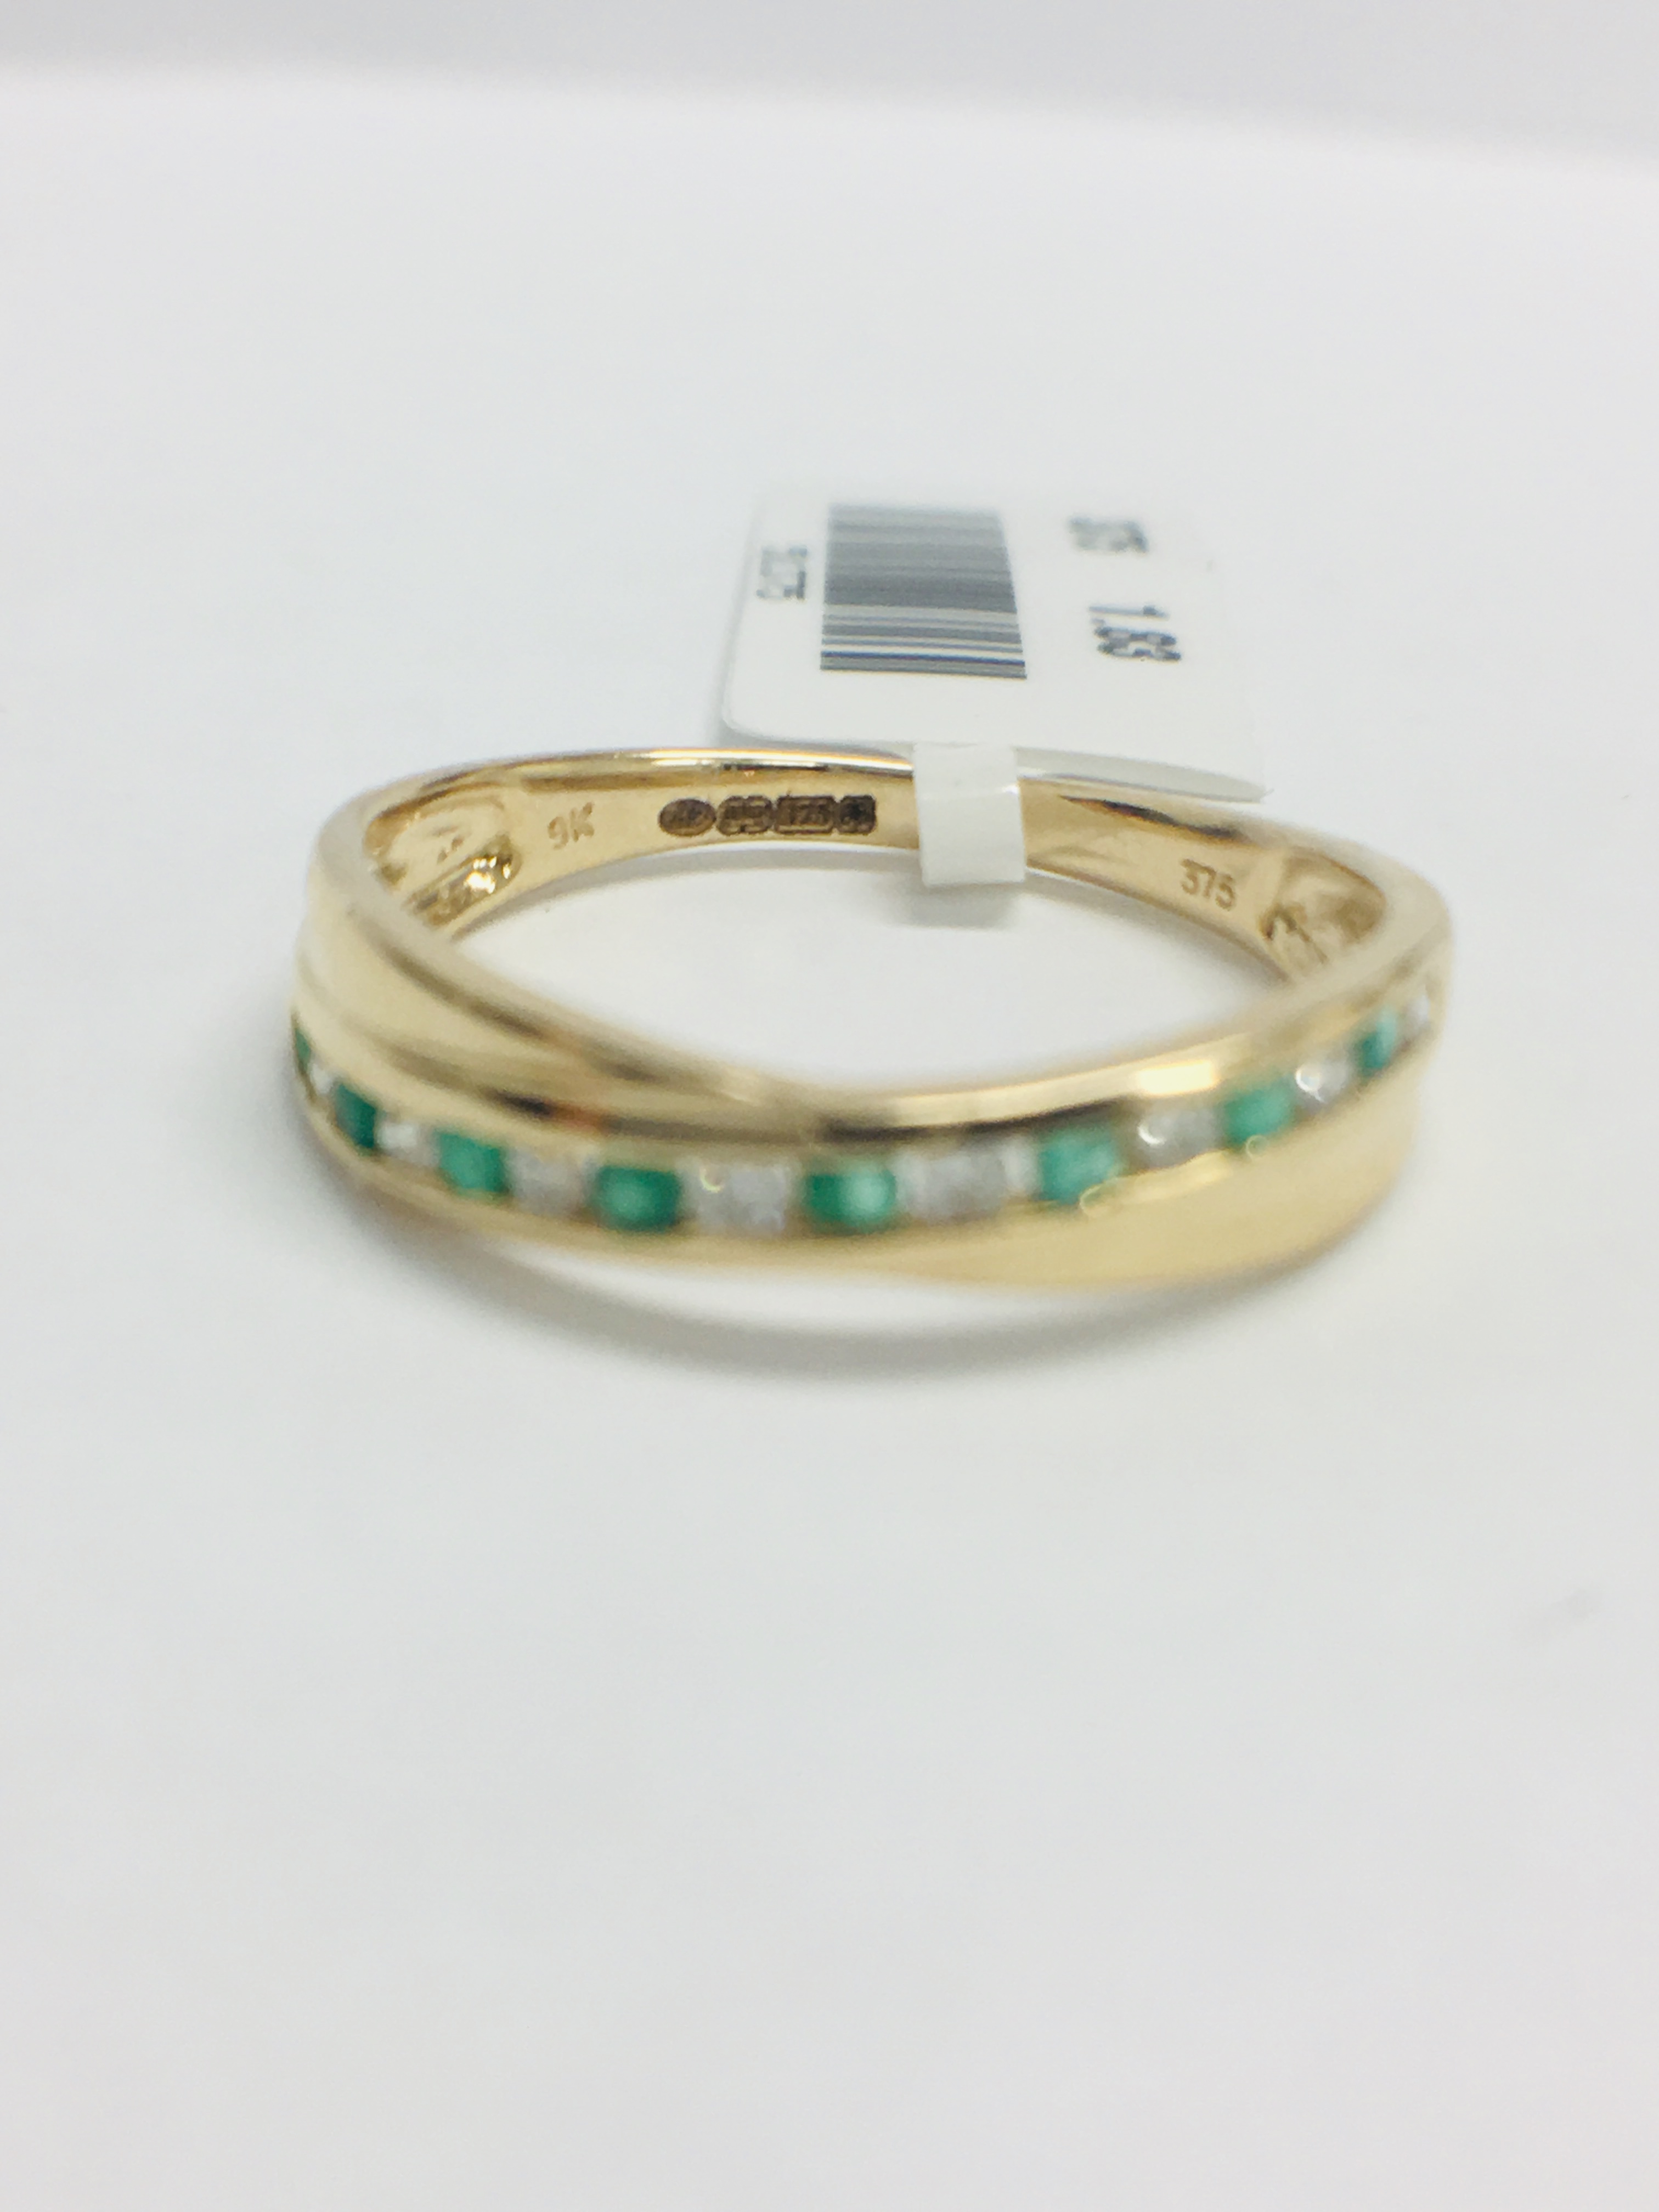 9Ct Yellow Gold Emerald Diamond Crossover Band Ring, - Image 2 of 11